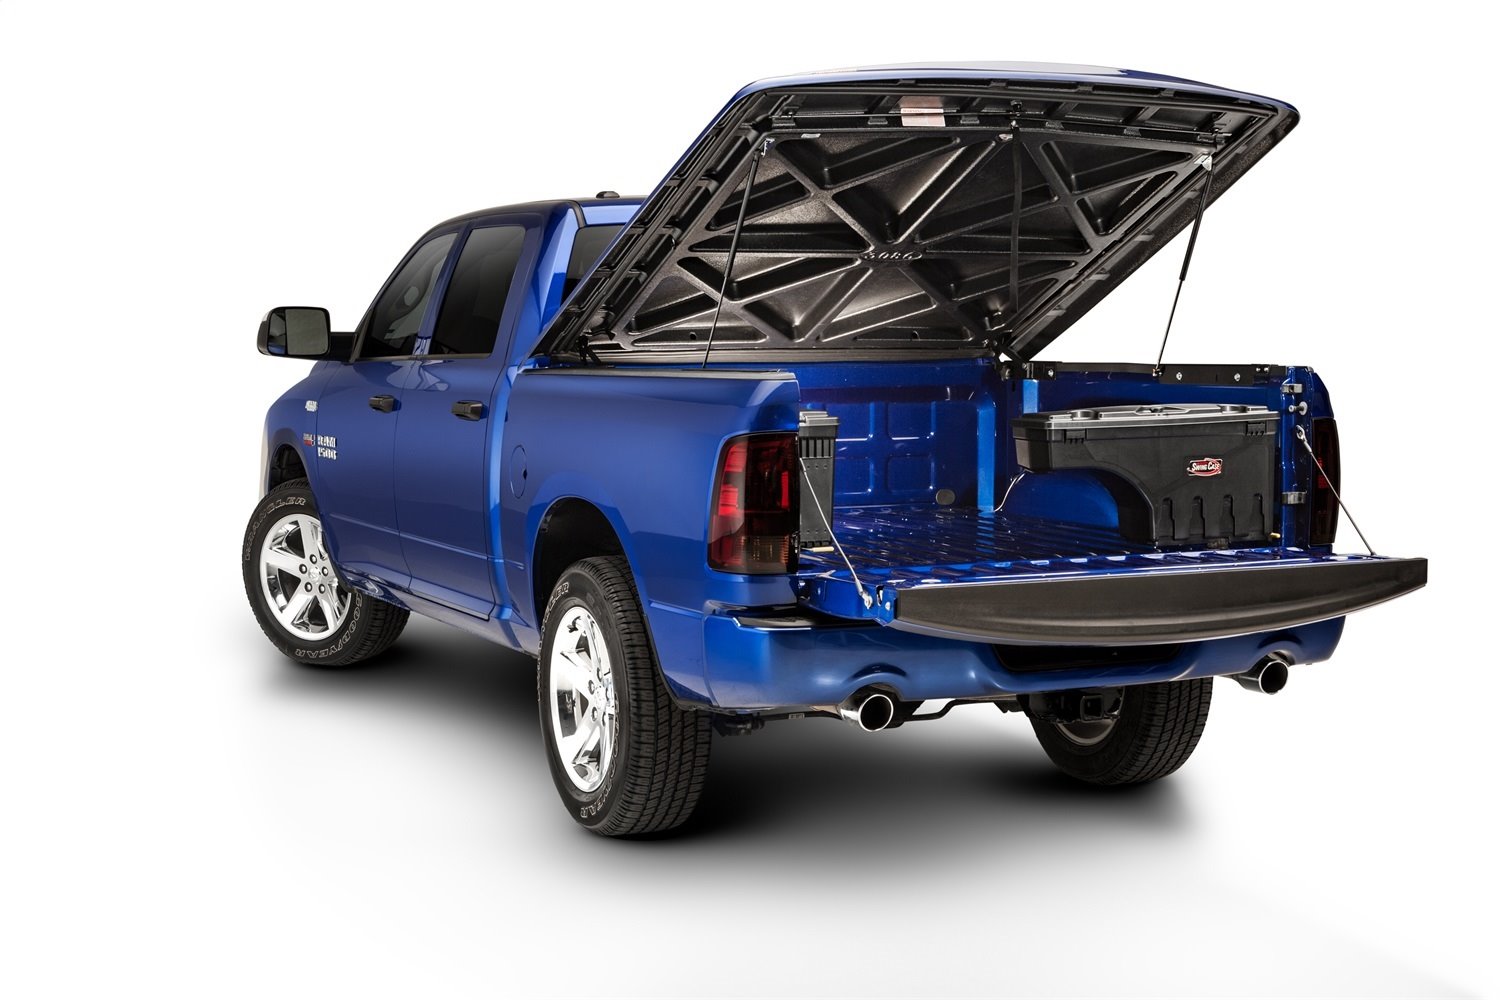 SC201P Swing Case, 1999-2014 Ford F-150 Styleside Passenger Side, Black, Will not fit 2000-2004 Heritage SuperCrew